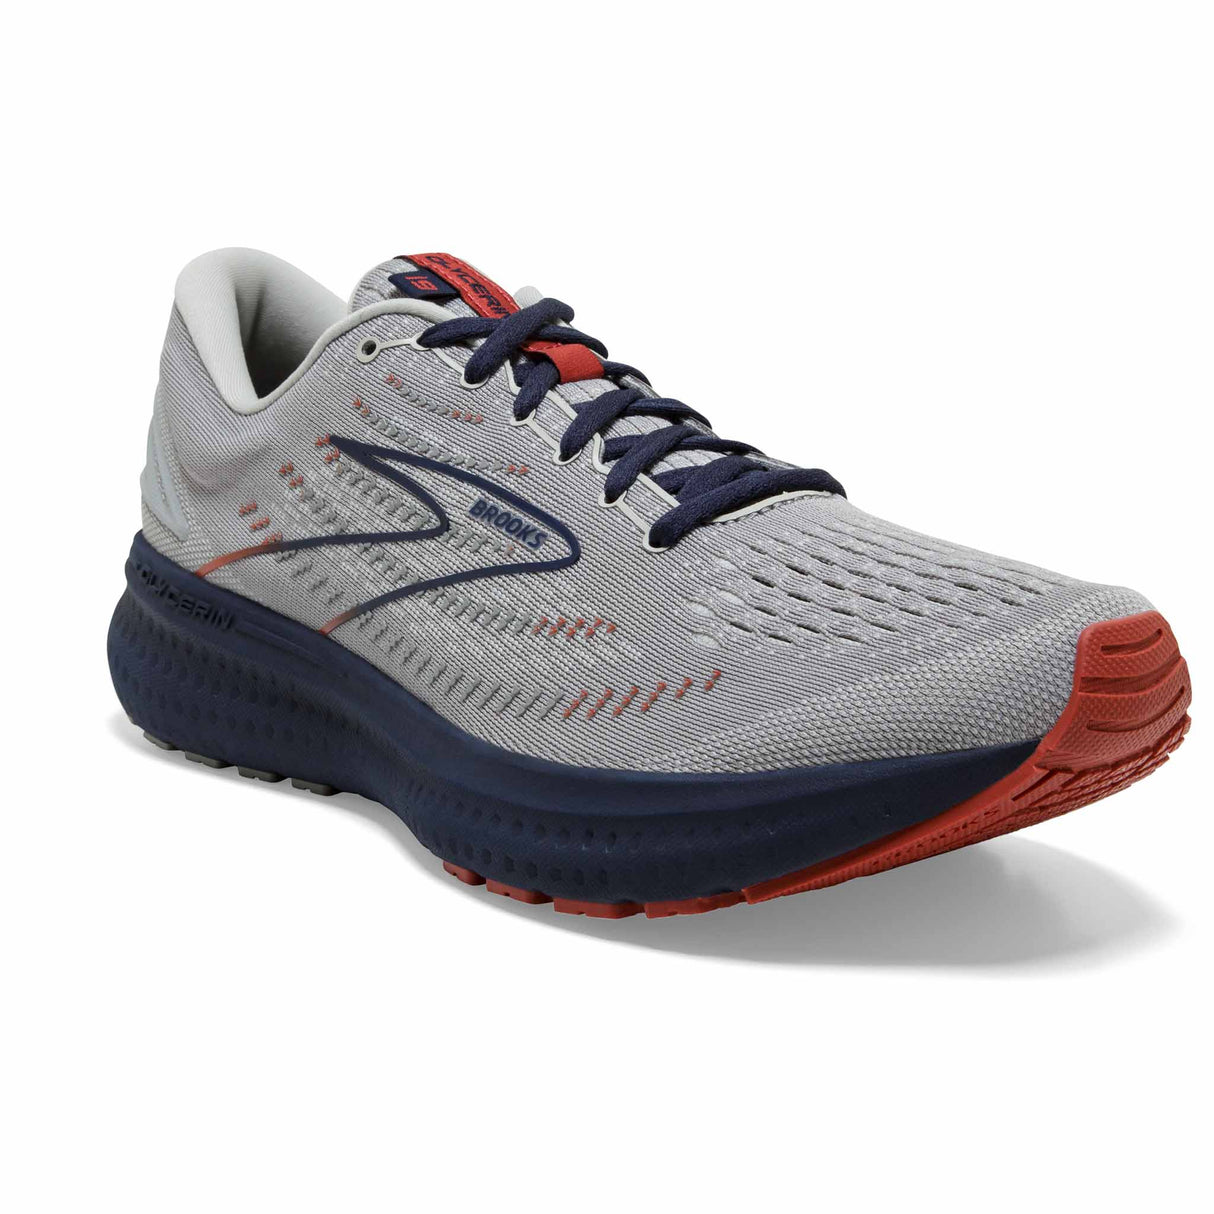 Brooks Glycerin 19 chaussures de course à pied homme - Grey / Alloy / Peacoat - Angle